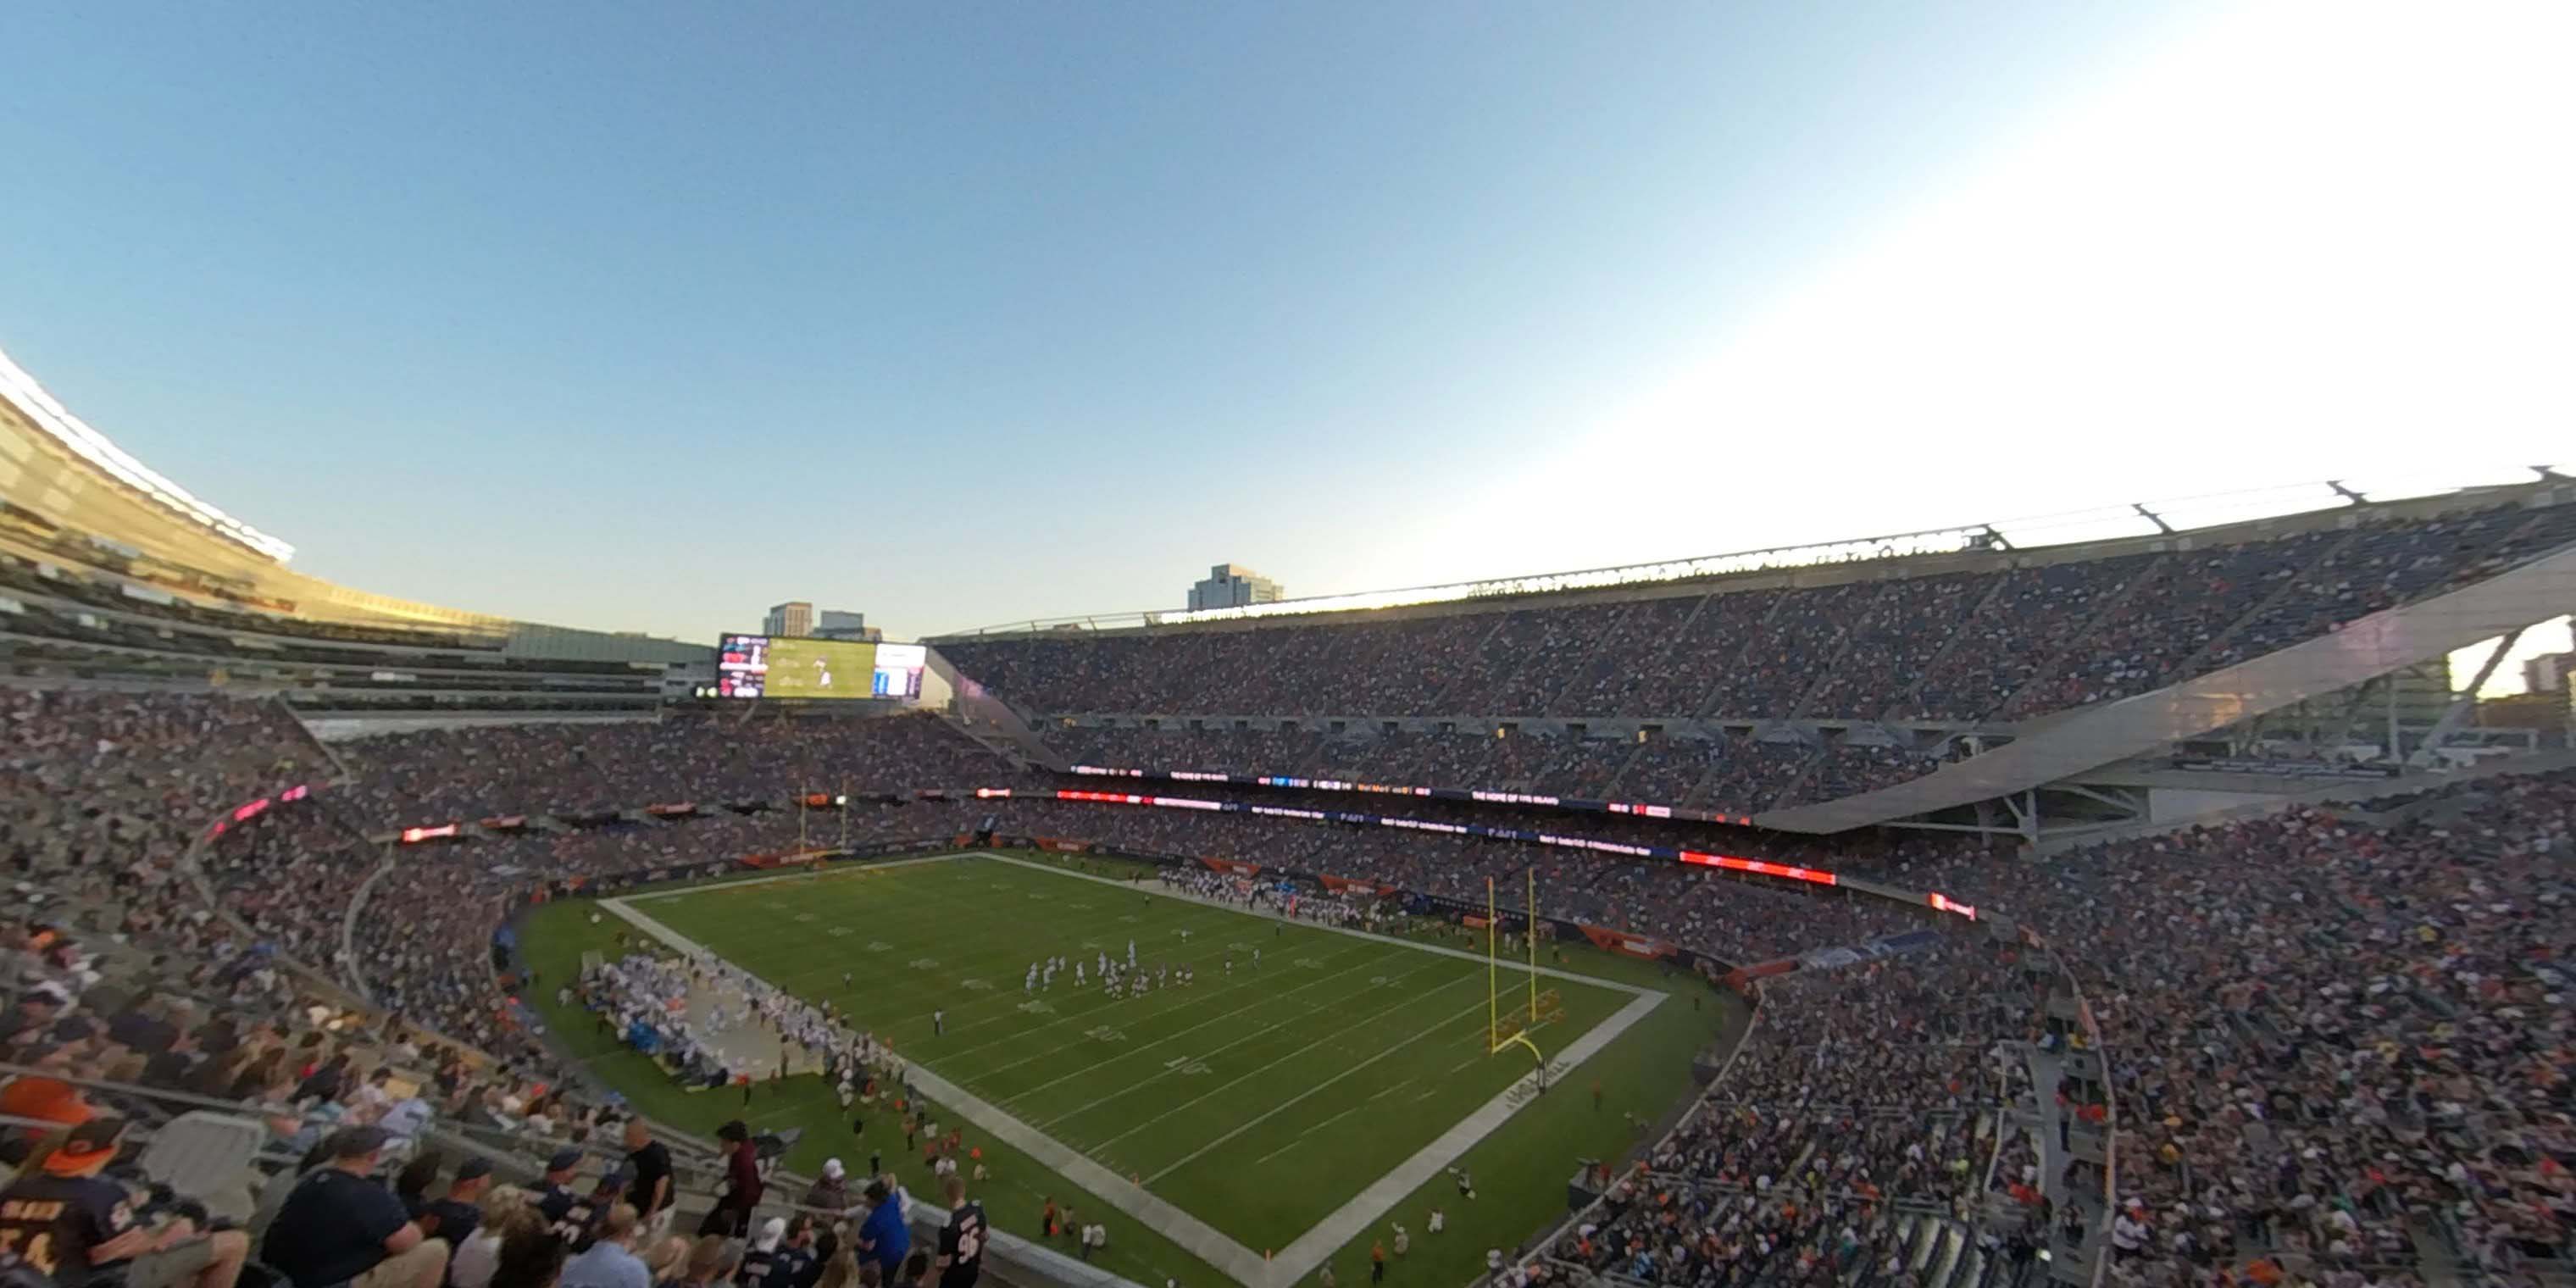 section 301 panoramic seat view  for football - soldier field